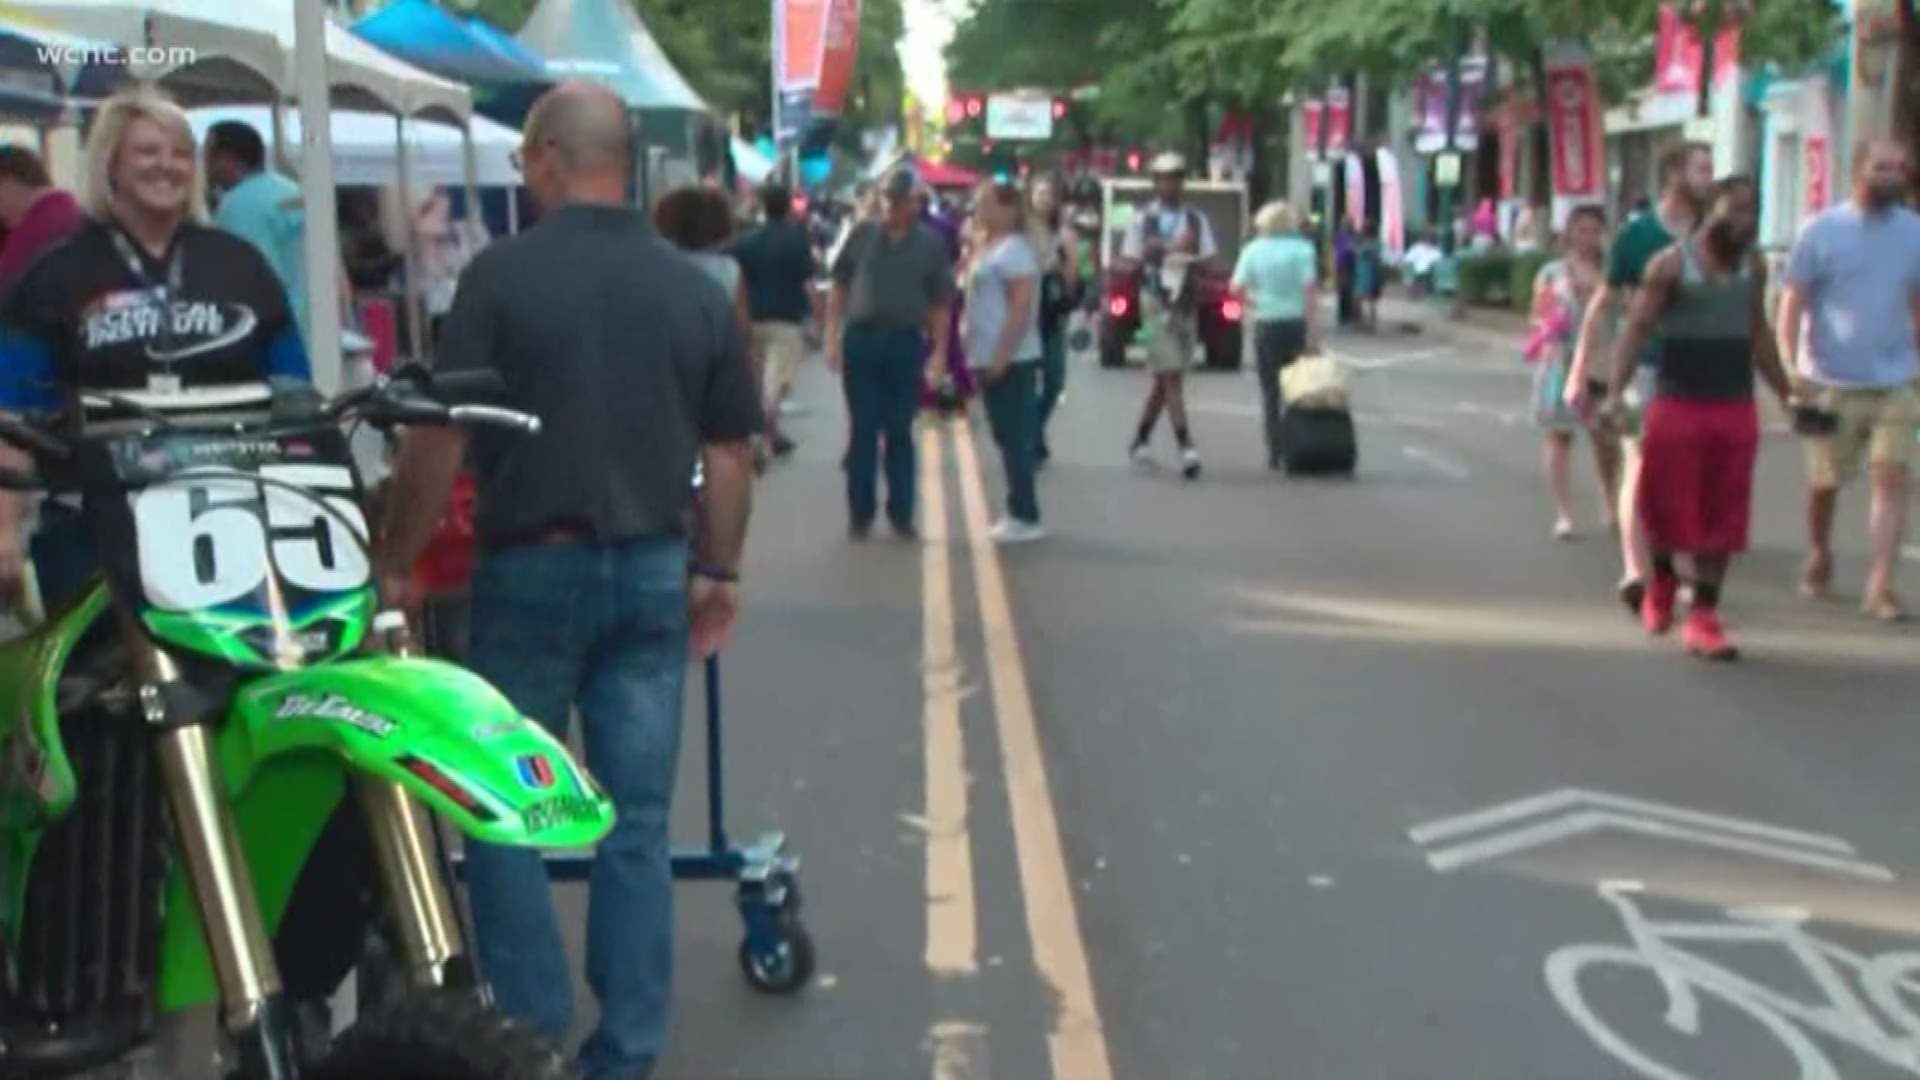 Speed Street will be in uptown Saturday as well, from noon to 8 p.m. Friday night's event had NASCAR drivers.